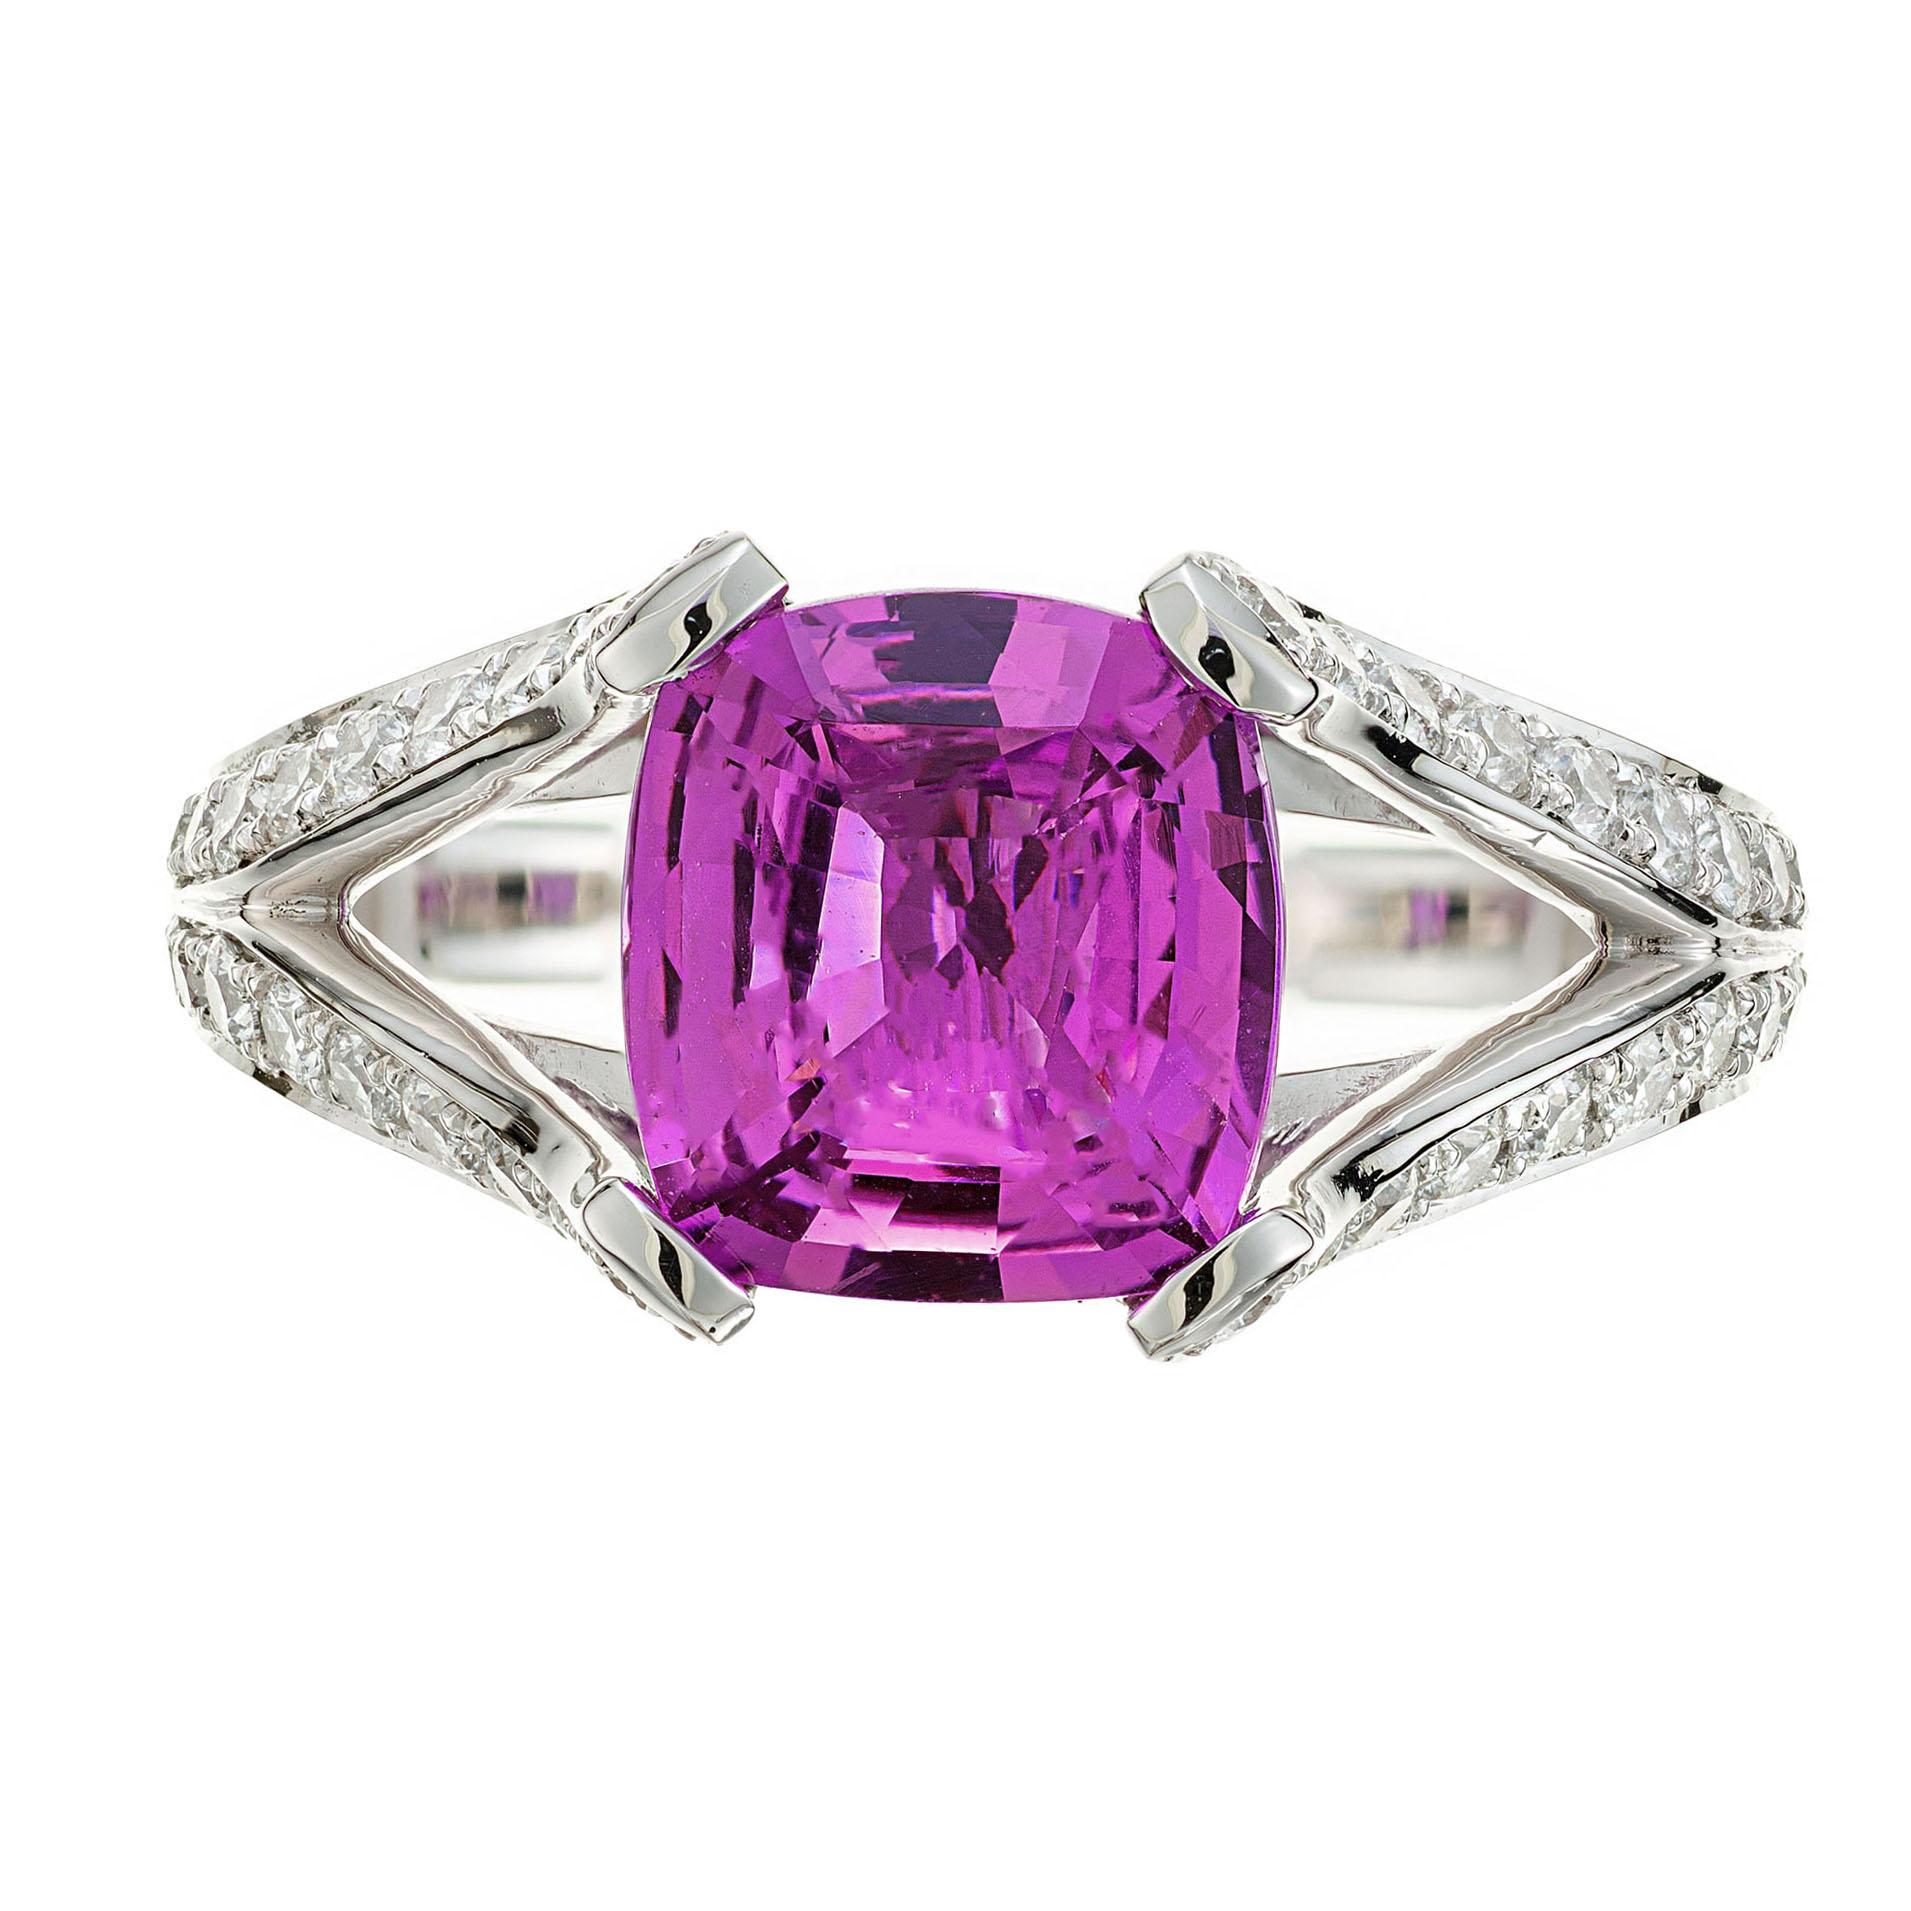 Pink sapphire and diamond engagement ring. GIA certified cushion cut center sapphire in a platinum split shank setting. 54 round brilliant cut accent diamonds. Simply put, this is one of the finest natural purple pink sapphires we have ever seen.